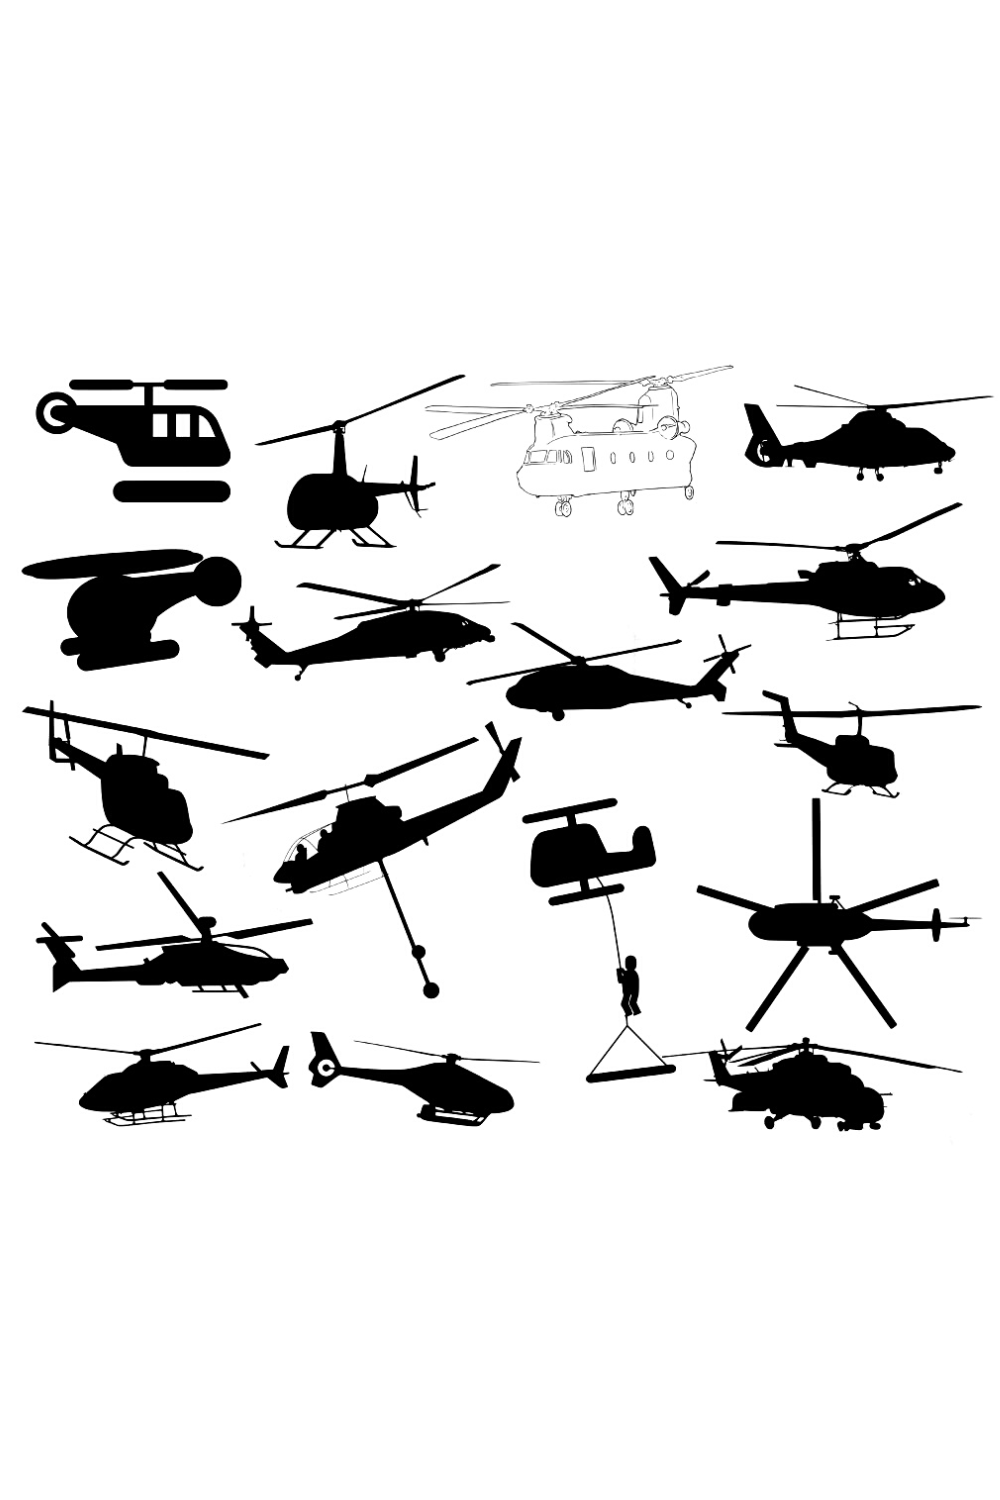 Helicopter Silhouette Bundles pinterest image.